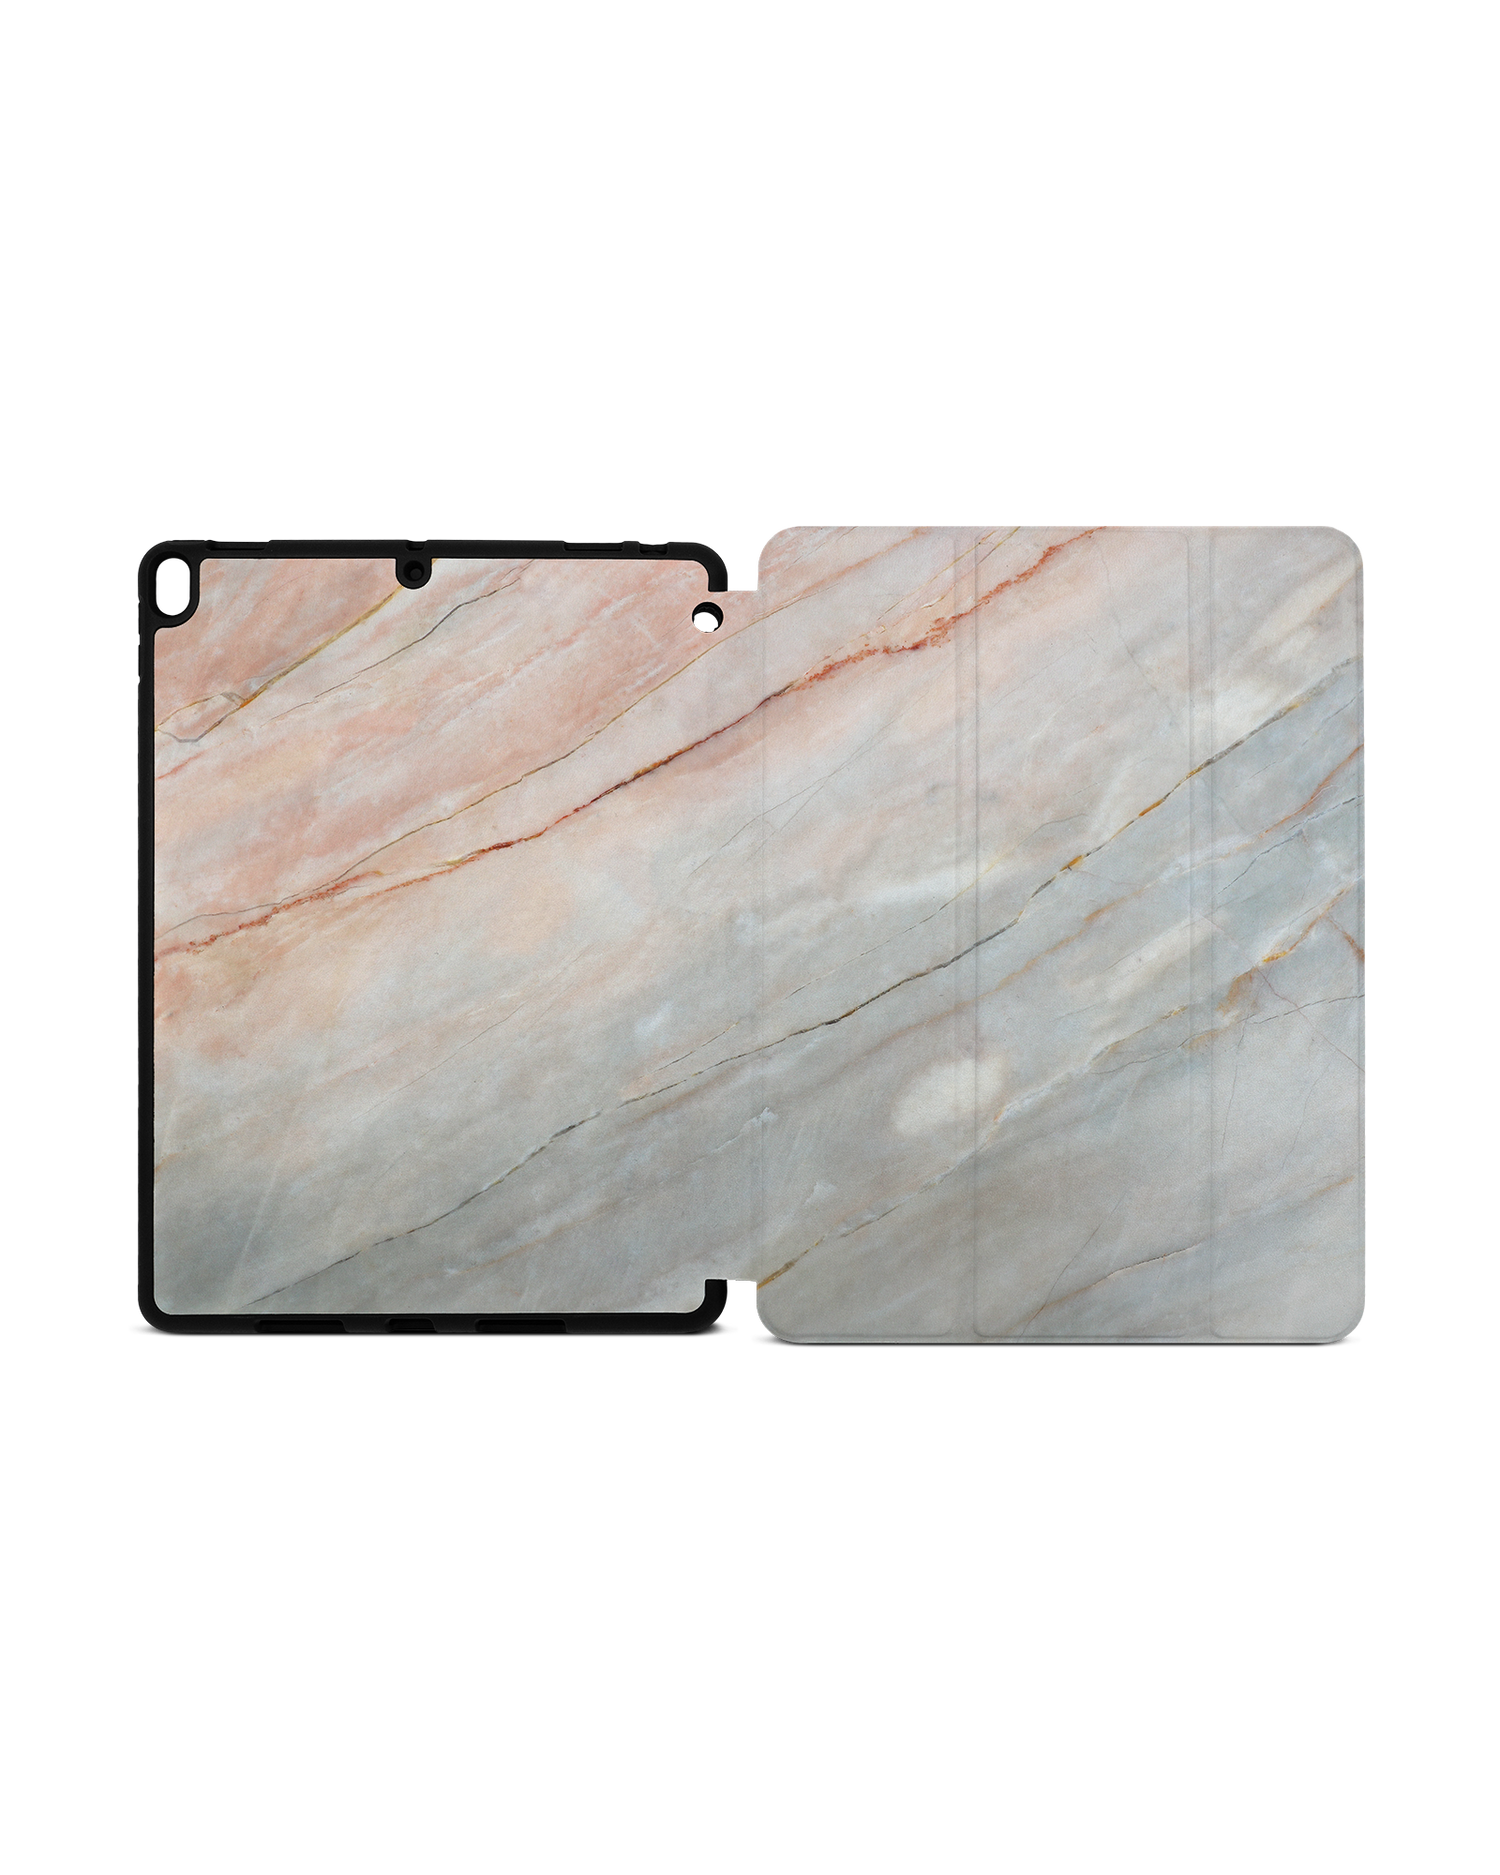 Mother of Pearl Marble iPad Case with Pencil Holder Apple iPad Pro 10.5